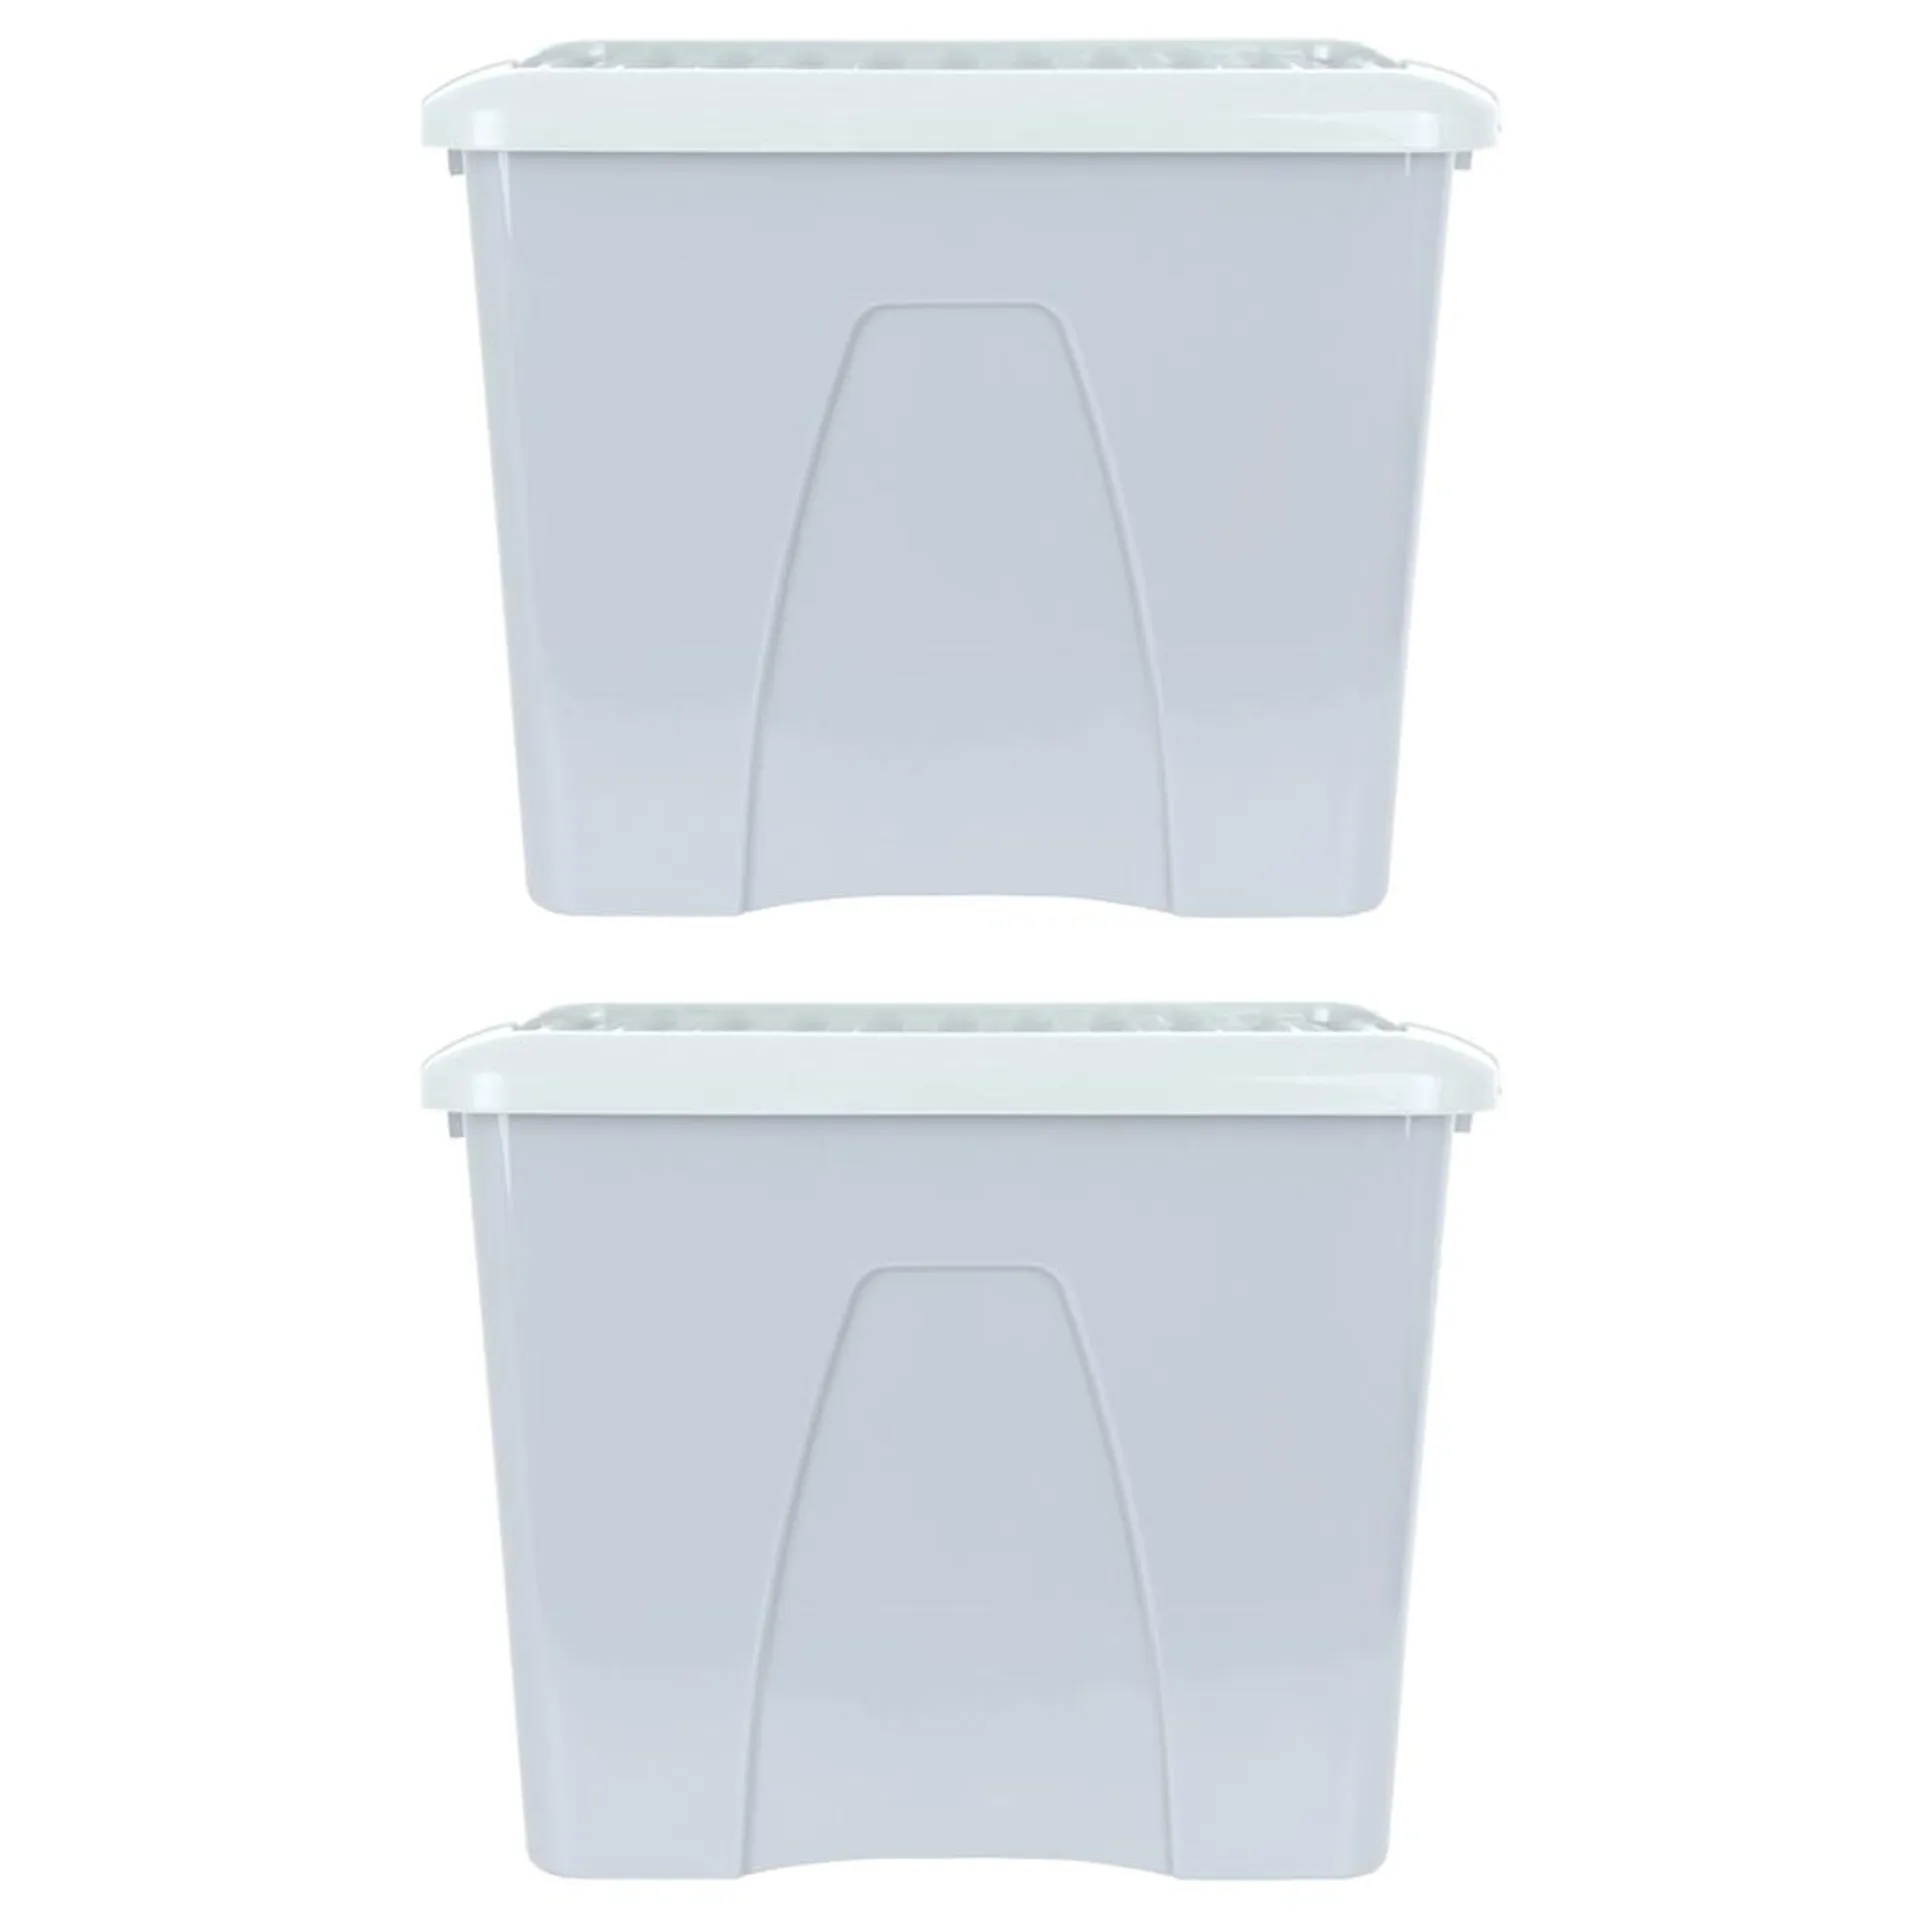 Wham 75L Soft Grey Home Upcycle Box and Lid 2 Pack